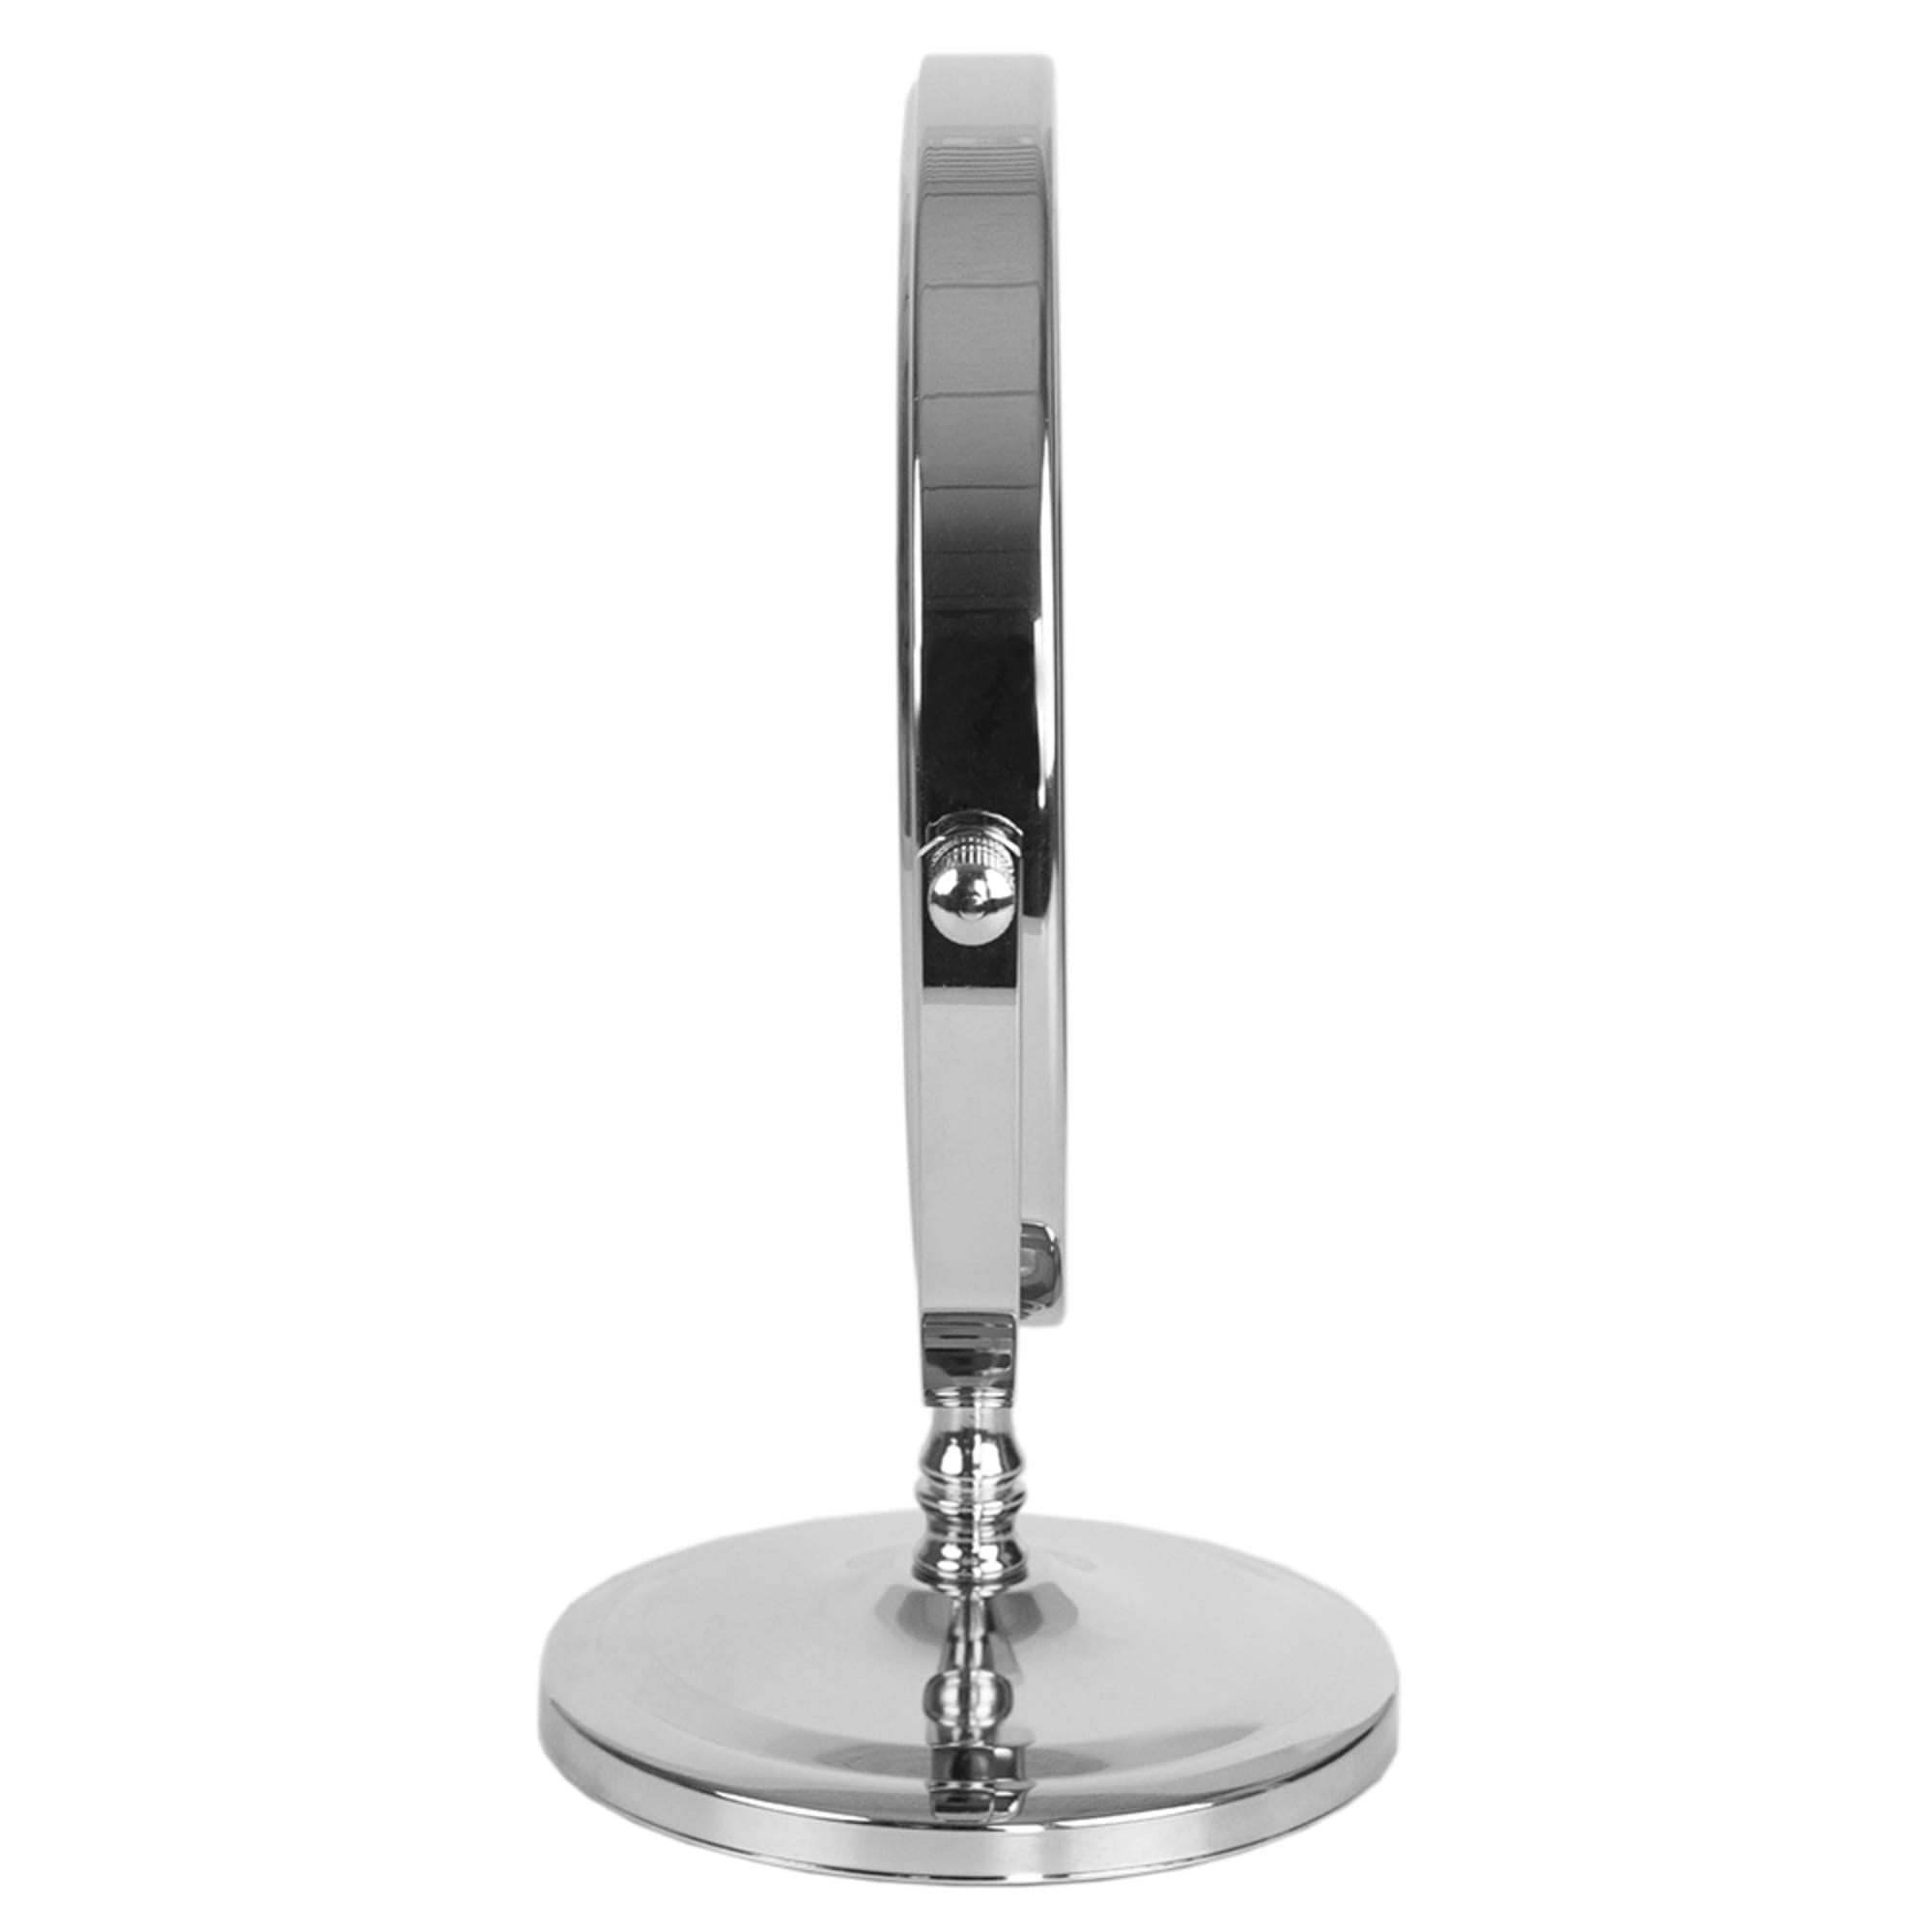 Home Basics Countertop and Tabletop Dual Sided Cosmetic Mirror, Chrome $8 EACH, CASE PACK OF 12